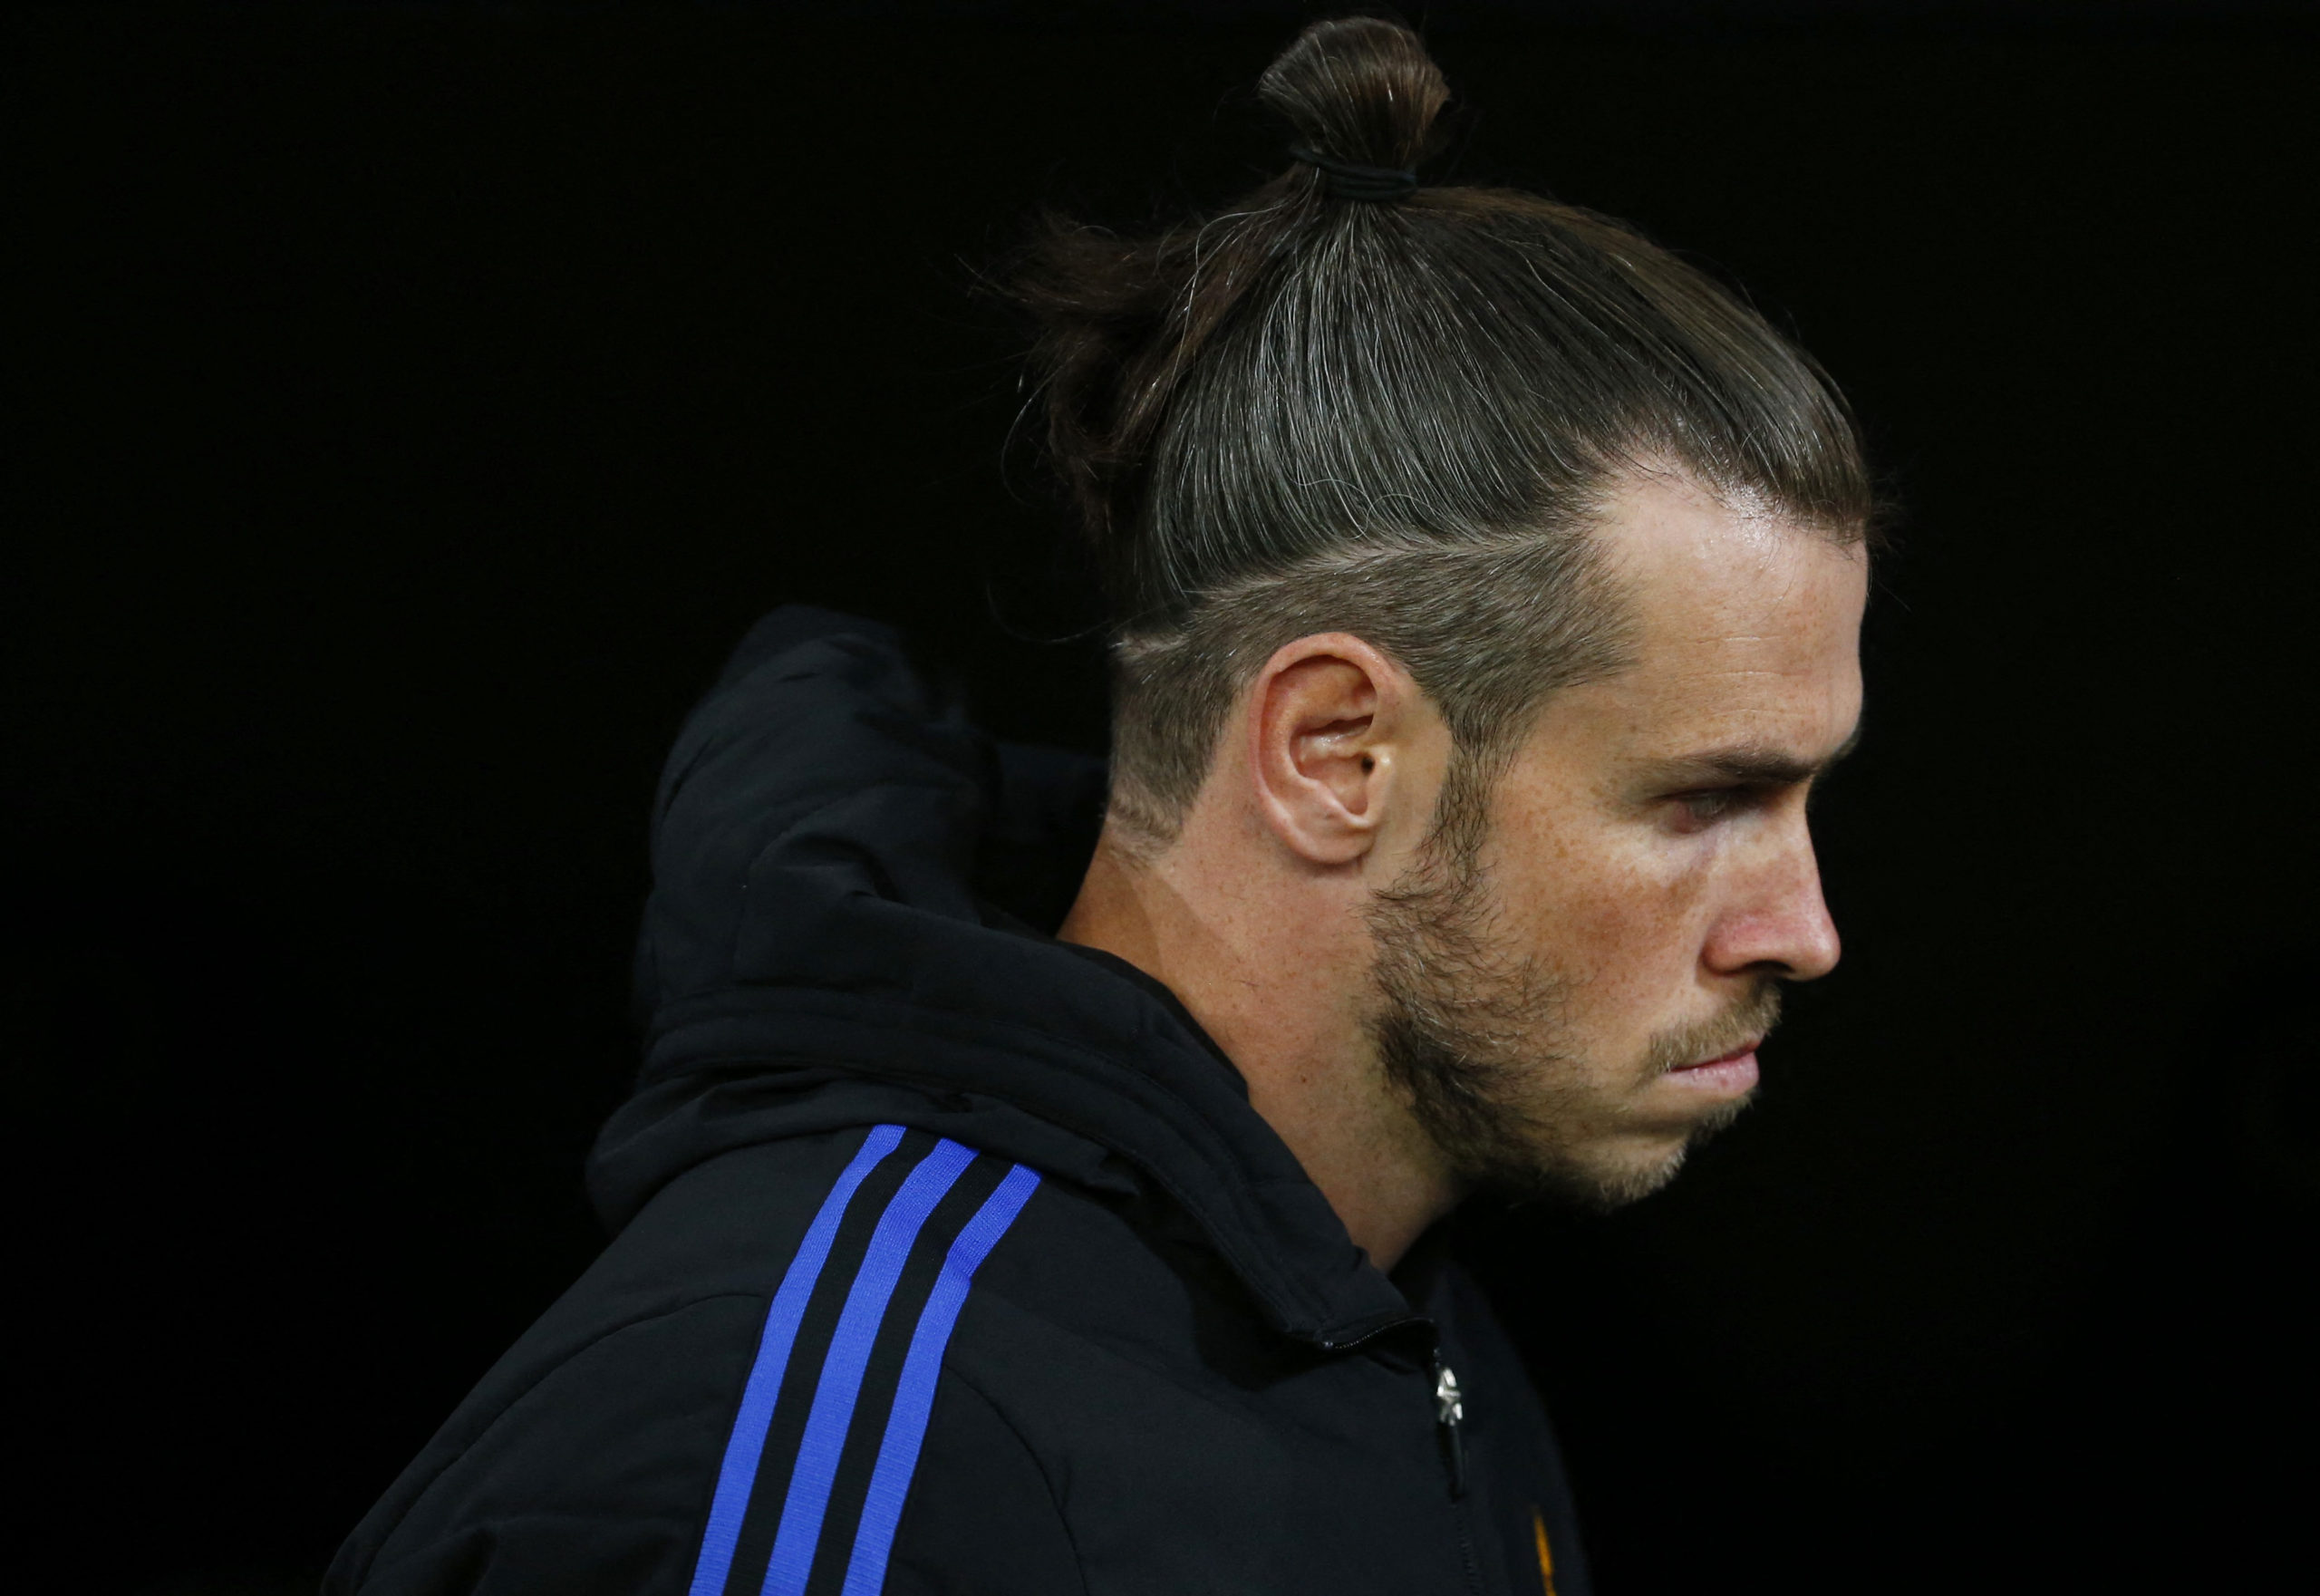  Real Madrid's Gareth Bale before the match 